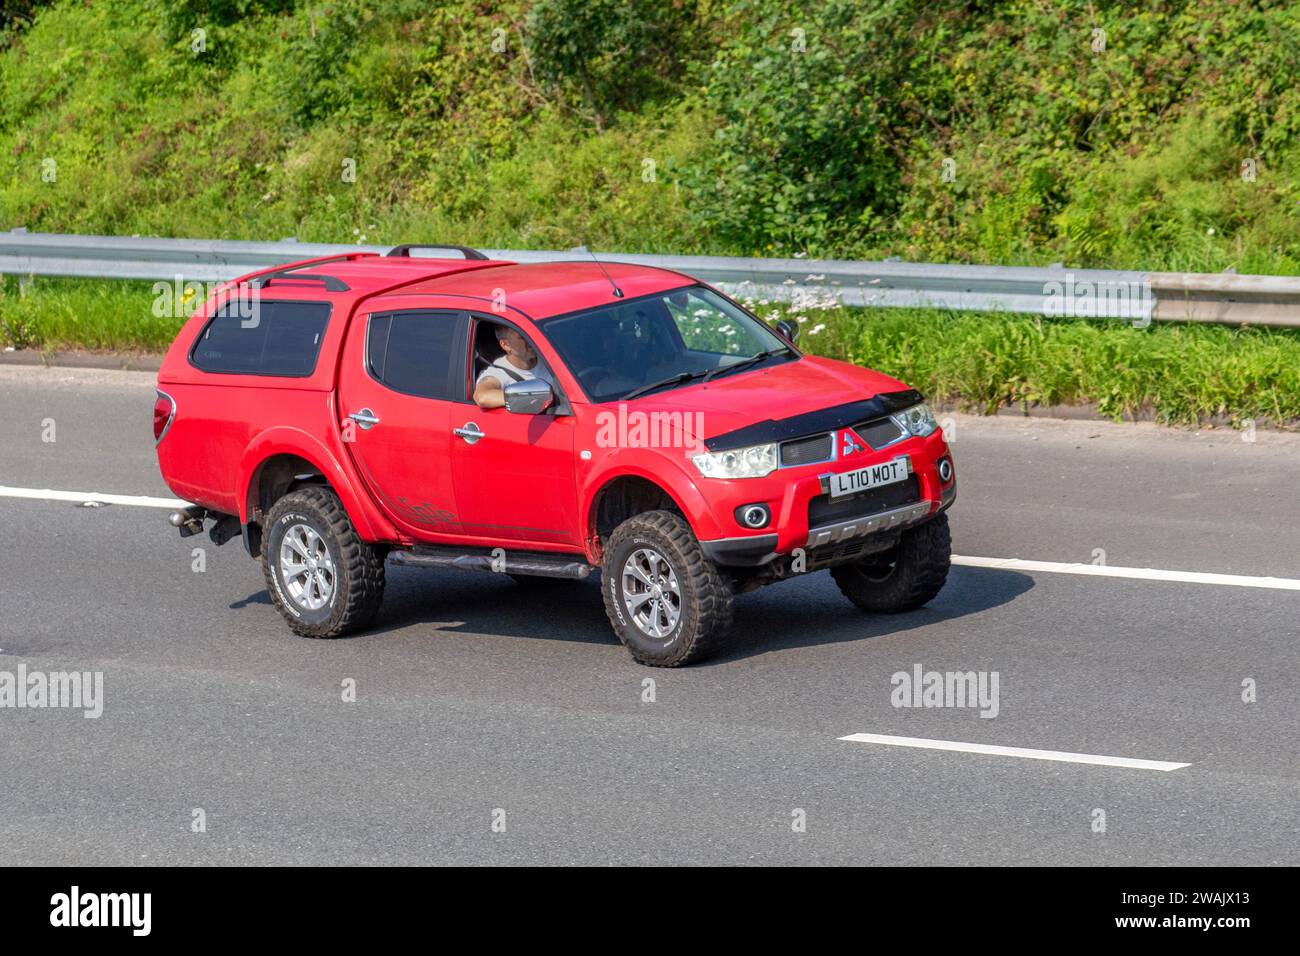 2010 Red Mitsubishi L200barb Lb Dcb Di-D4x4 A DI-D 178 Auto LCV Double Cab Pick Up Diesel work truck 2477 cc; travelling at speed on the M6 motorway in Greater Manchester, UK Stock Photo